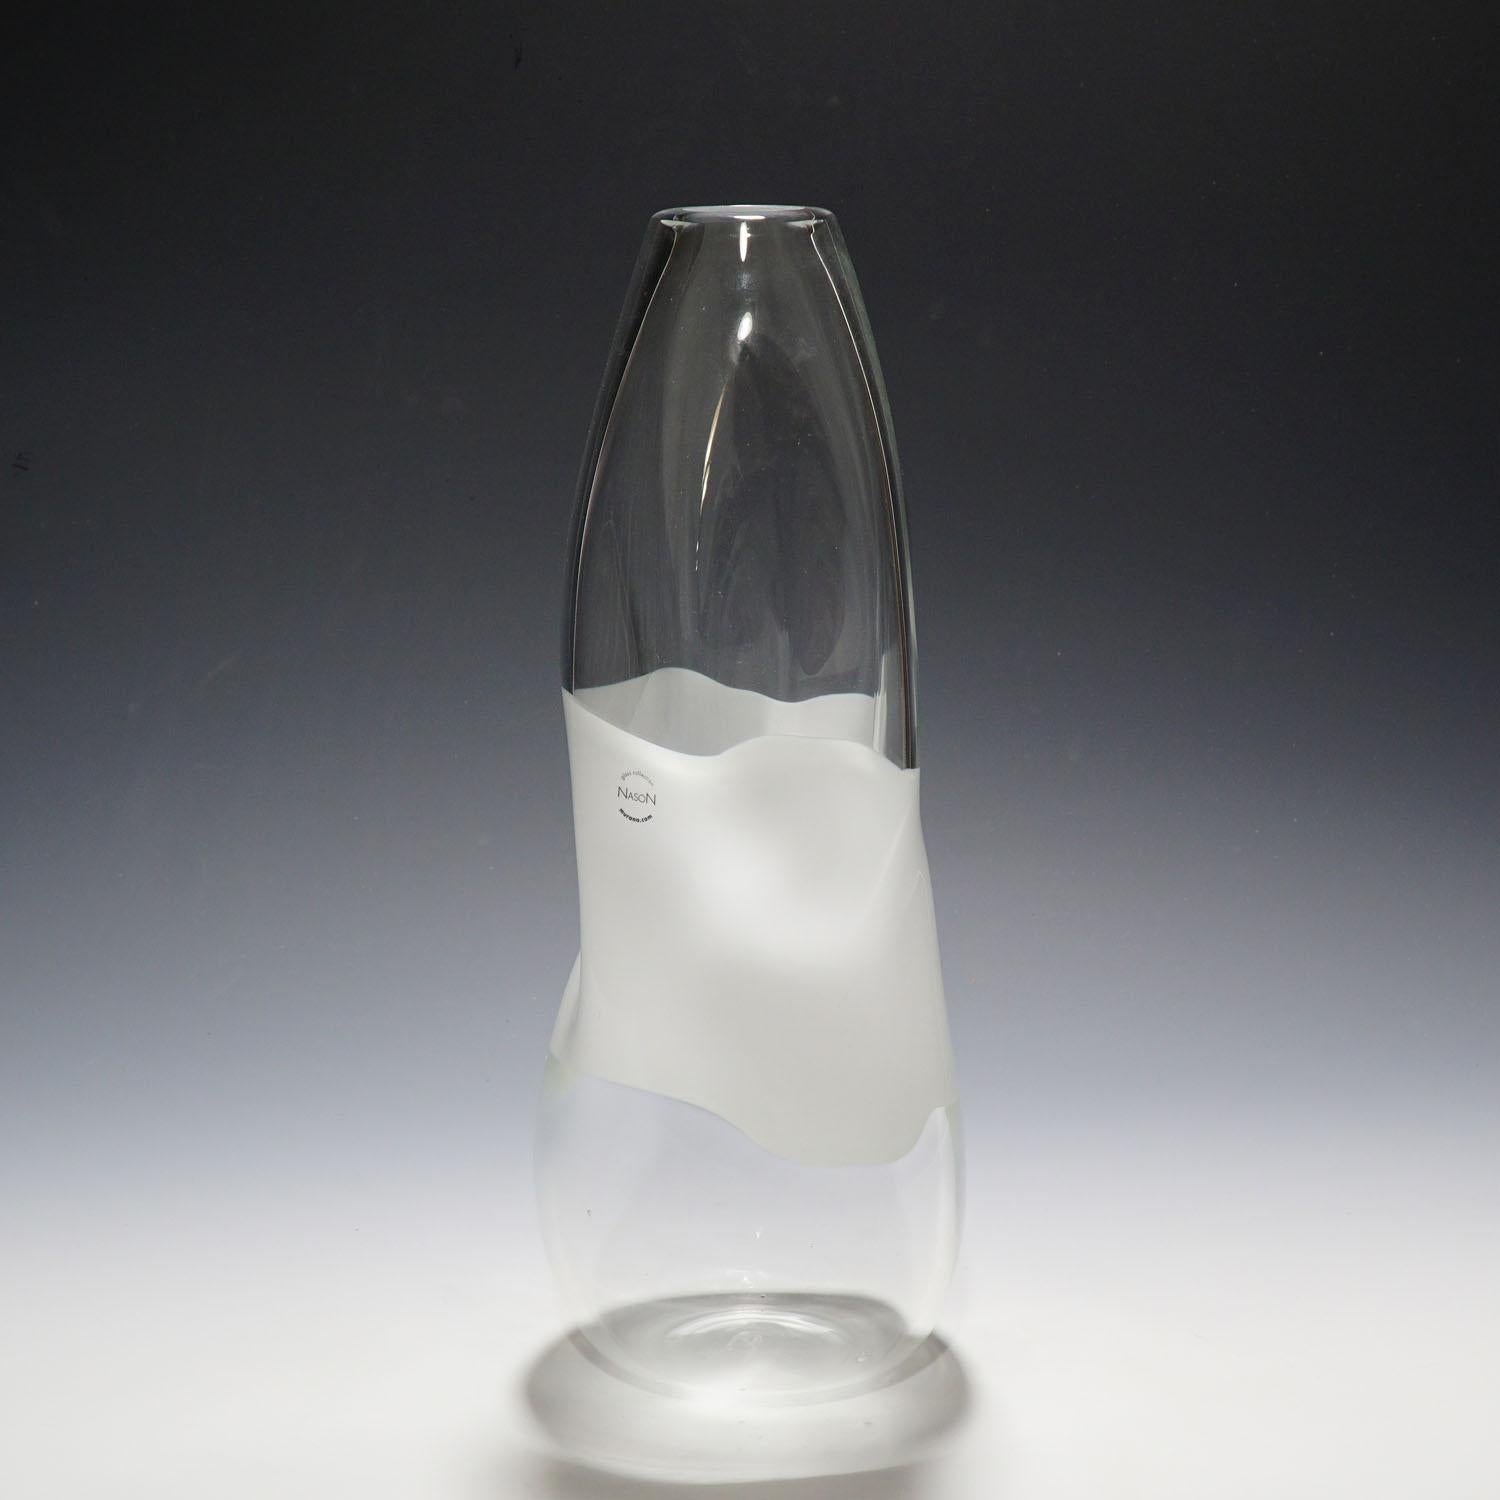 A large and decorative Murano glass vase of the 'Fiapi' series designed by Carlo Nason and manufactured by V. Nason & C. Murano end of the 20th century. Clear and white glass fused in incalmo technicue and asymetrical shaped. Lable of the